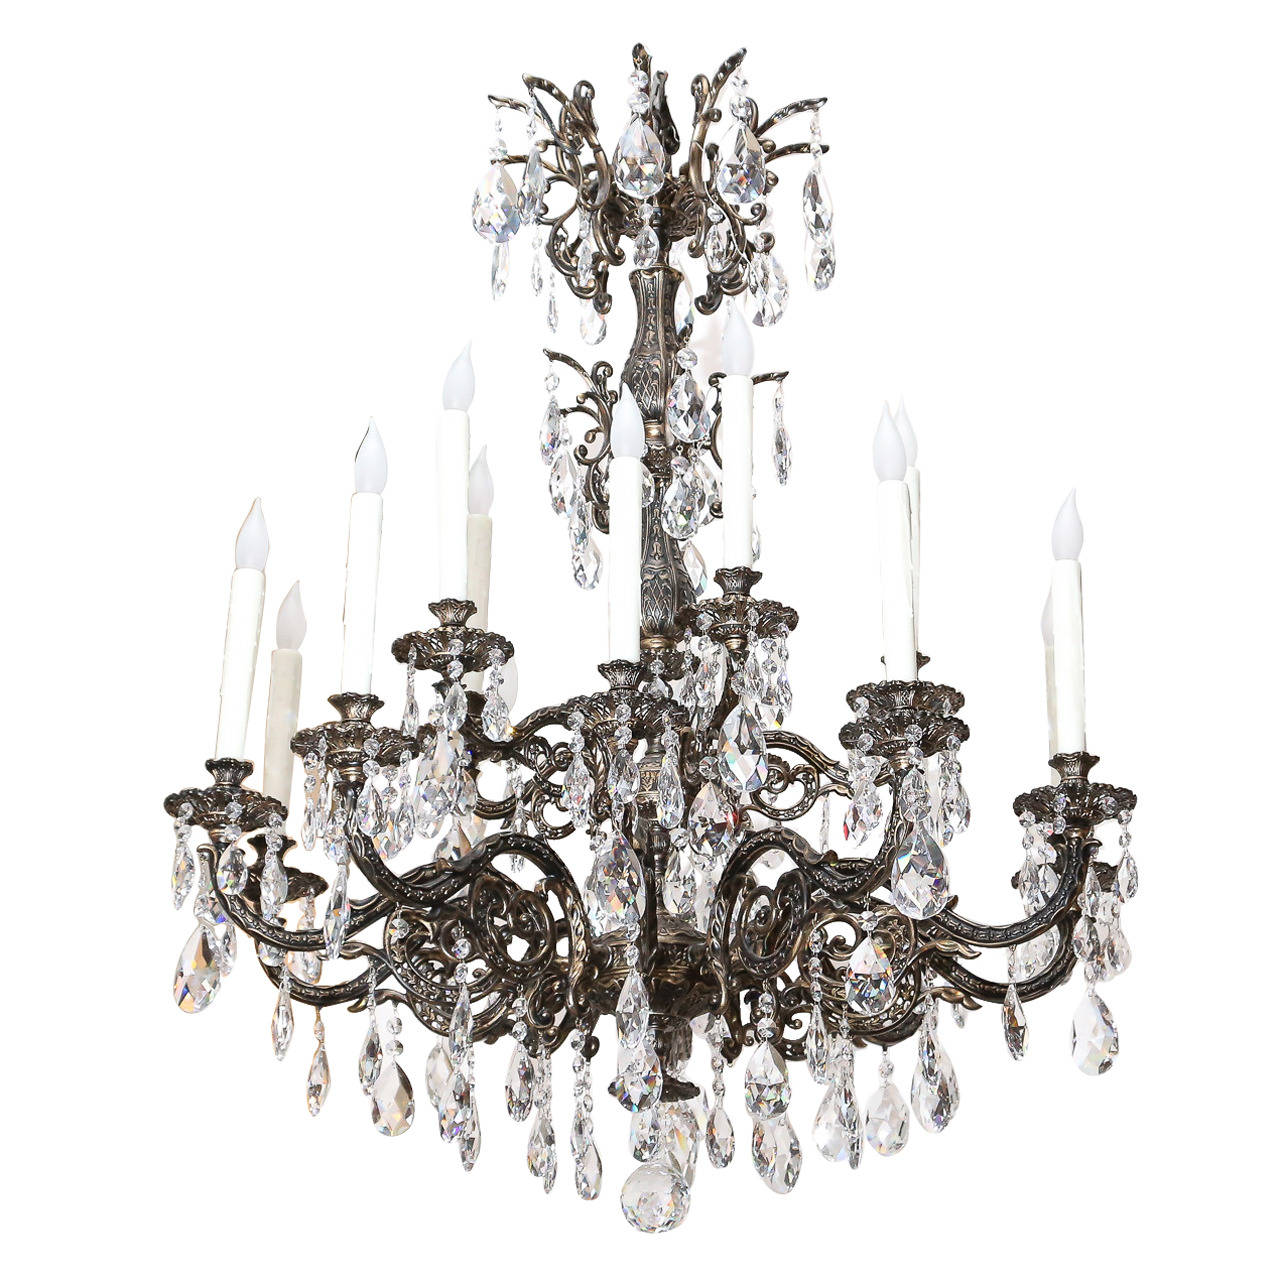 Bronze and Crystal FifteenLight Chandelier at 1stdibs